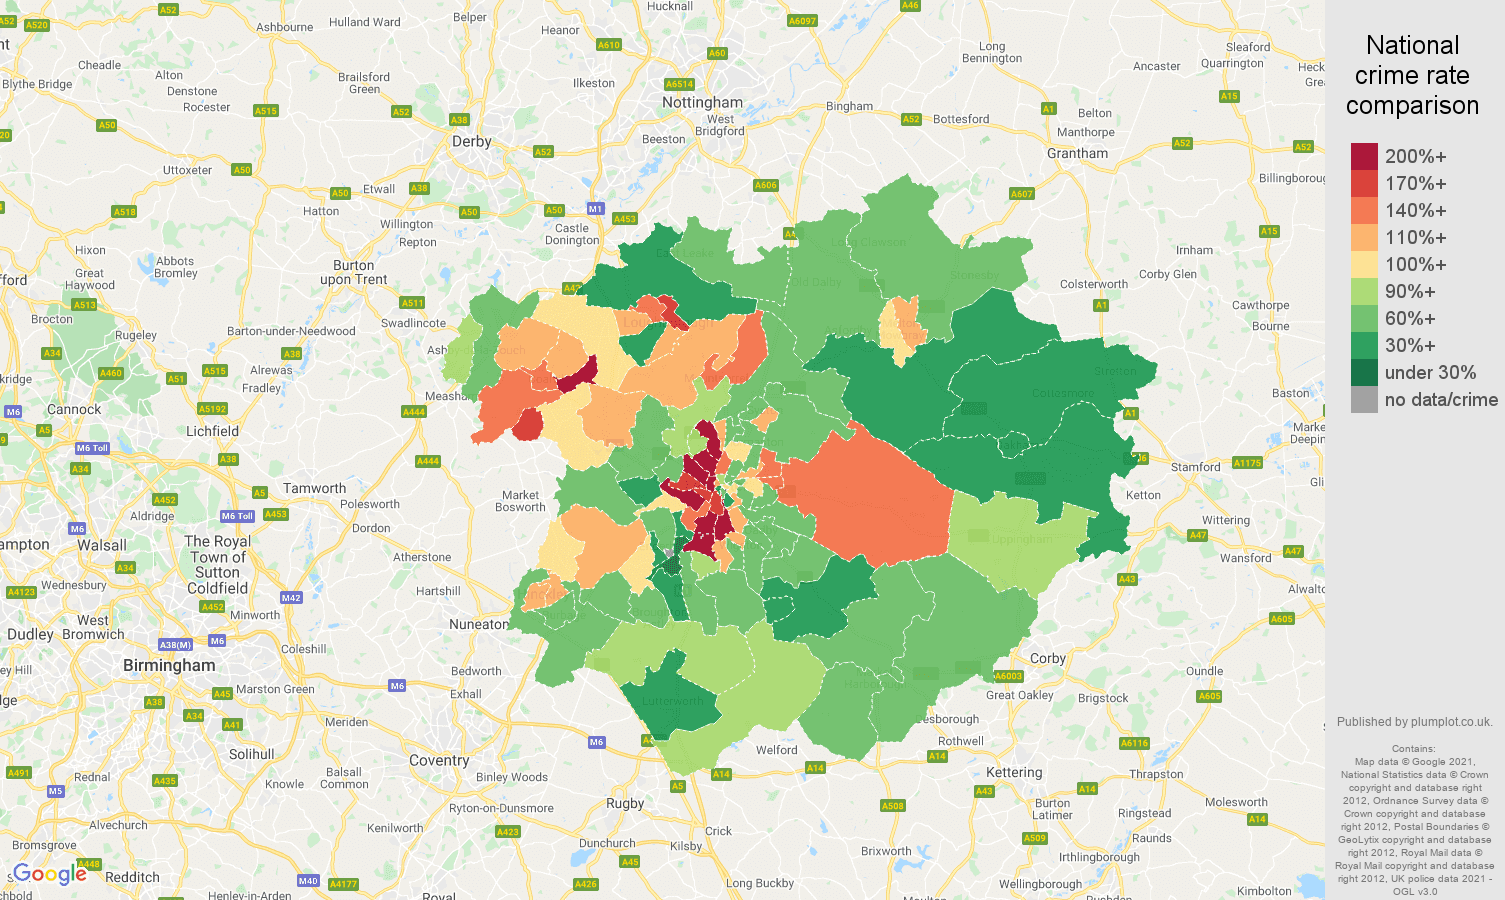 Leicester criminal damage and arson crime rate comparison map